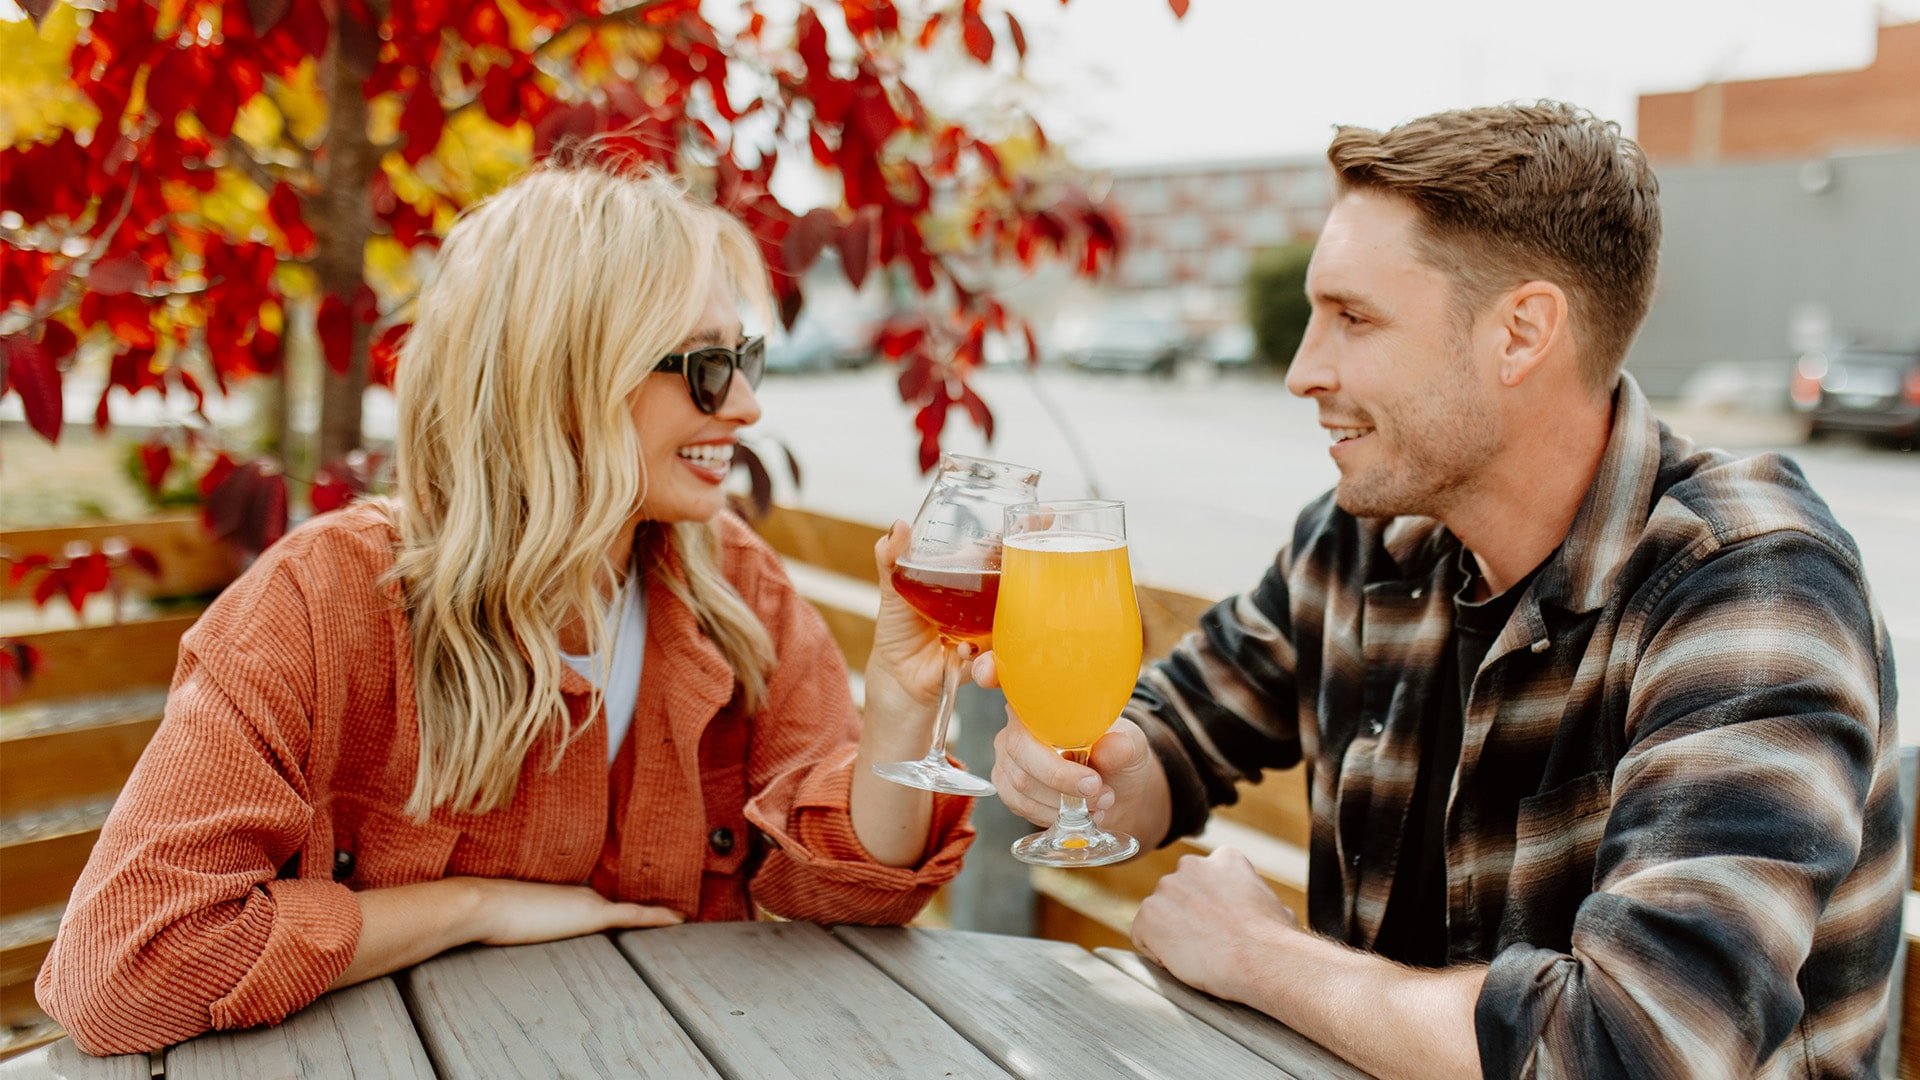 6 Steps to Prep Your Taproom for the Fall